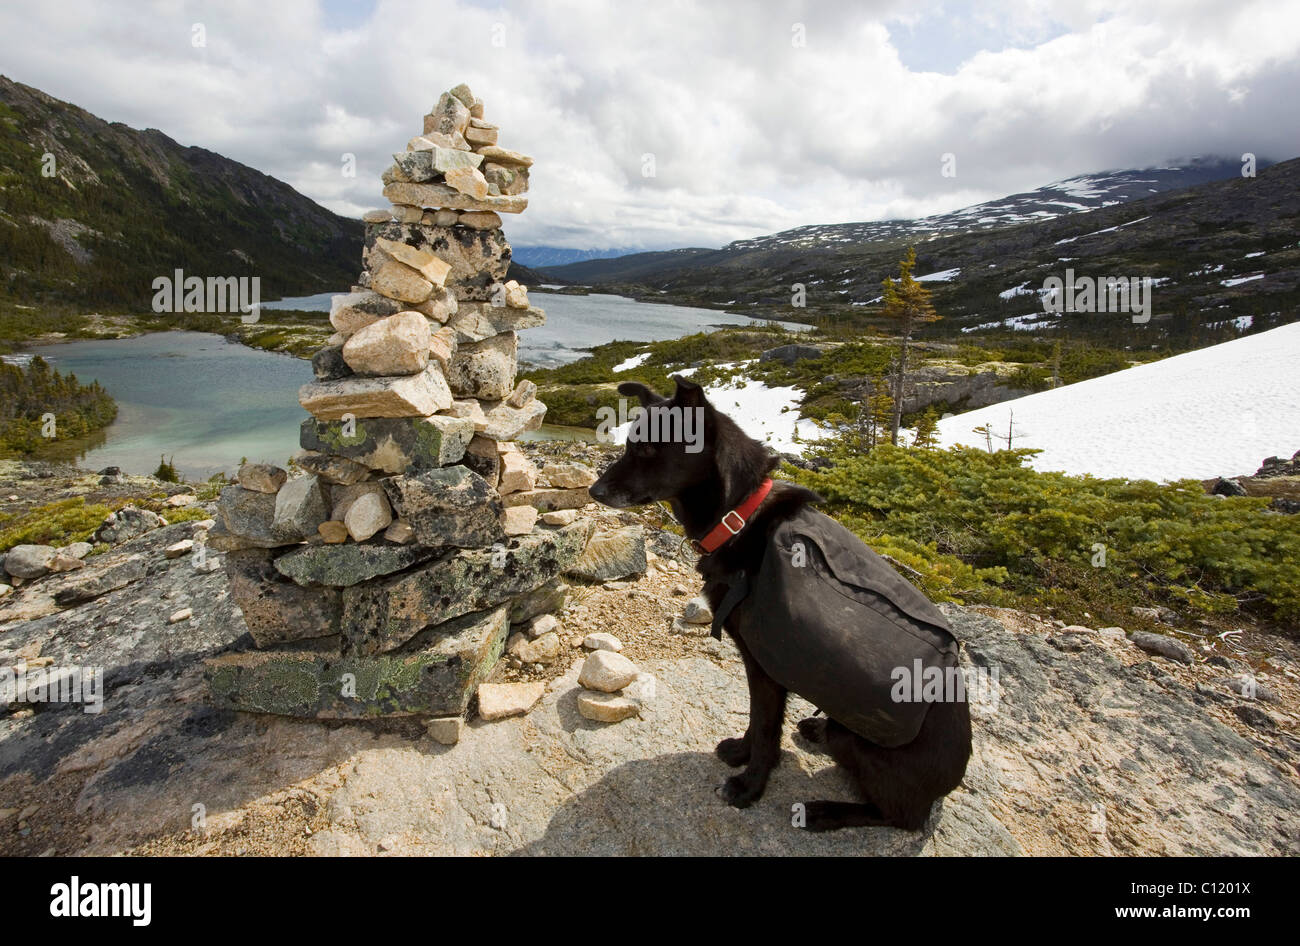 Sled dog, pack dog with pack, Alaskan Husky, resting at Inukshuk, cairn, as trail marker, Deep Lake behind, Chilkoot Trail Stock Photo